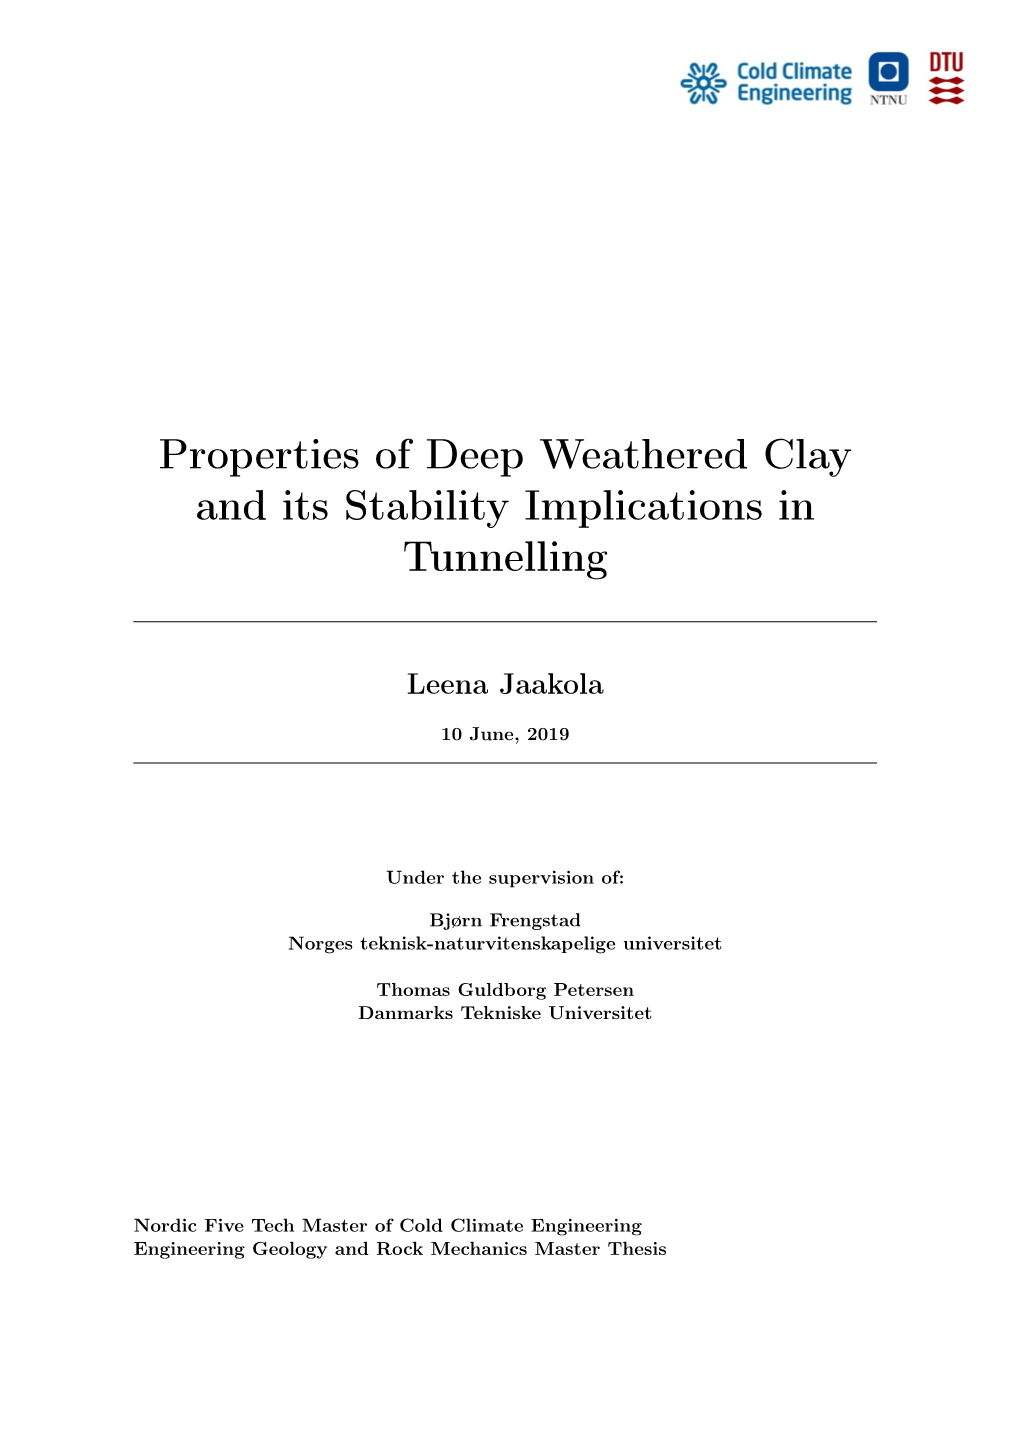 Properties of Deep Weathered Clay and Its Stability Implications in Tunnelling